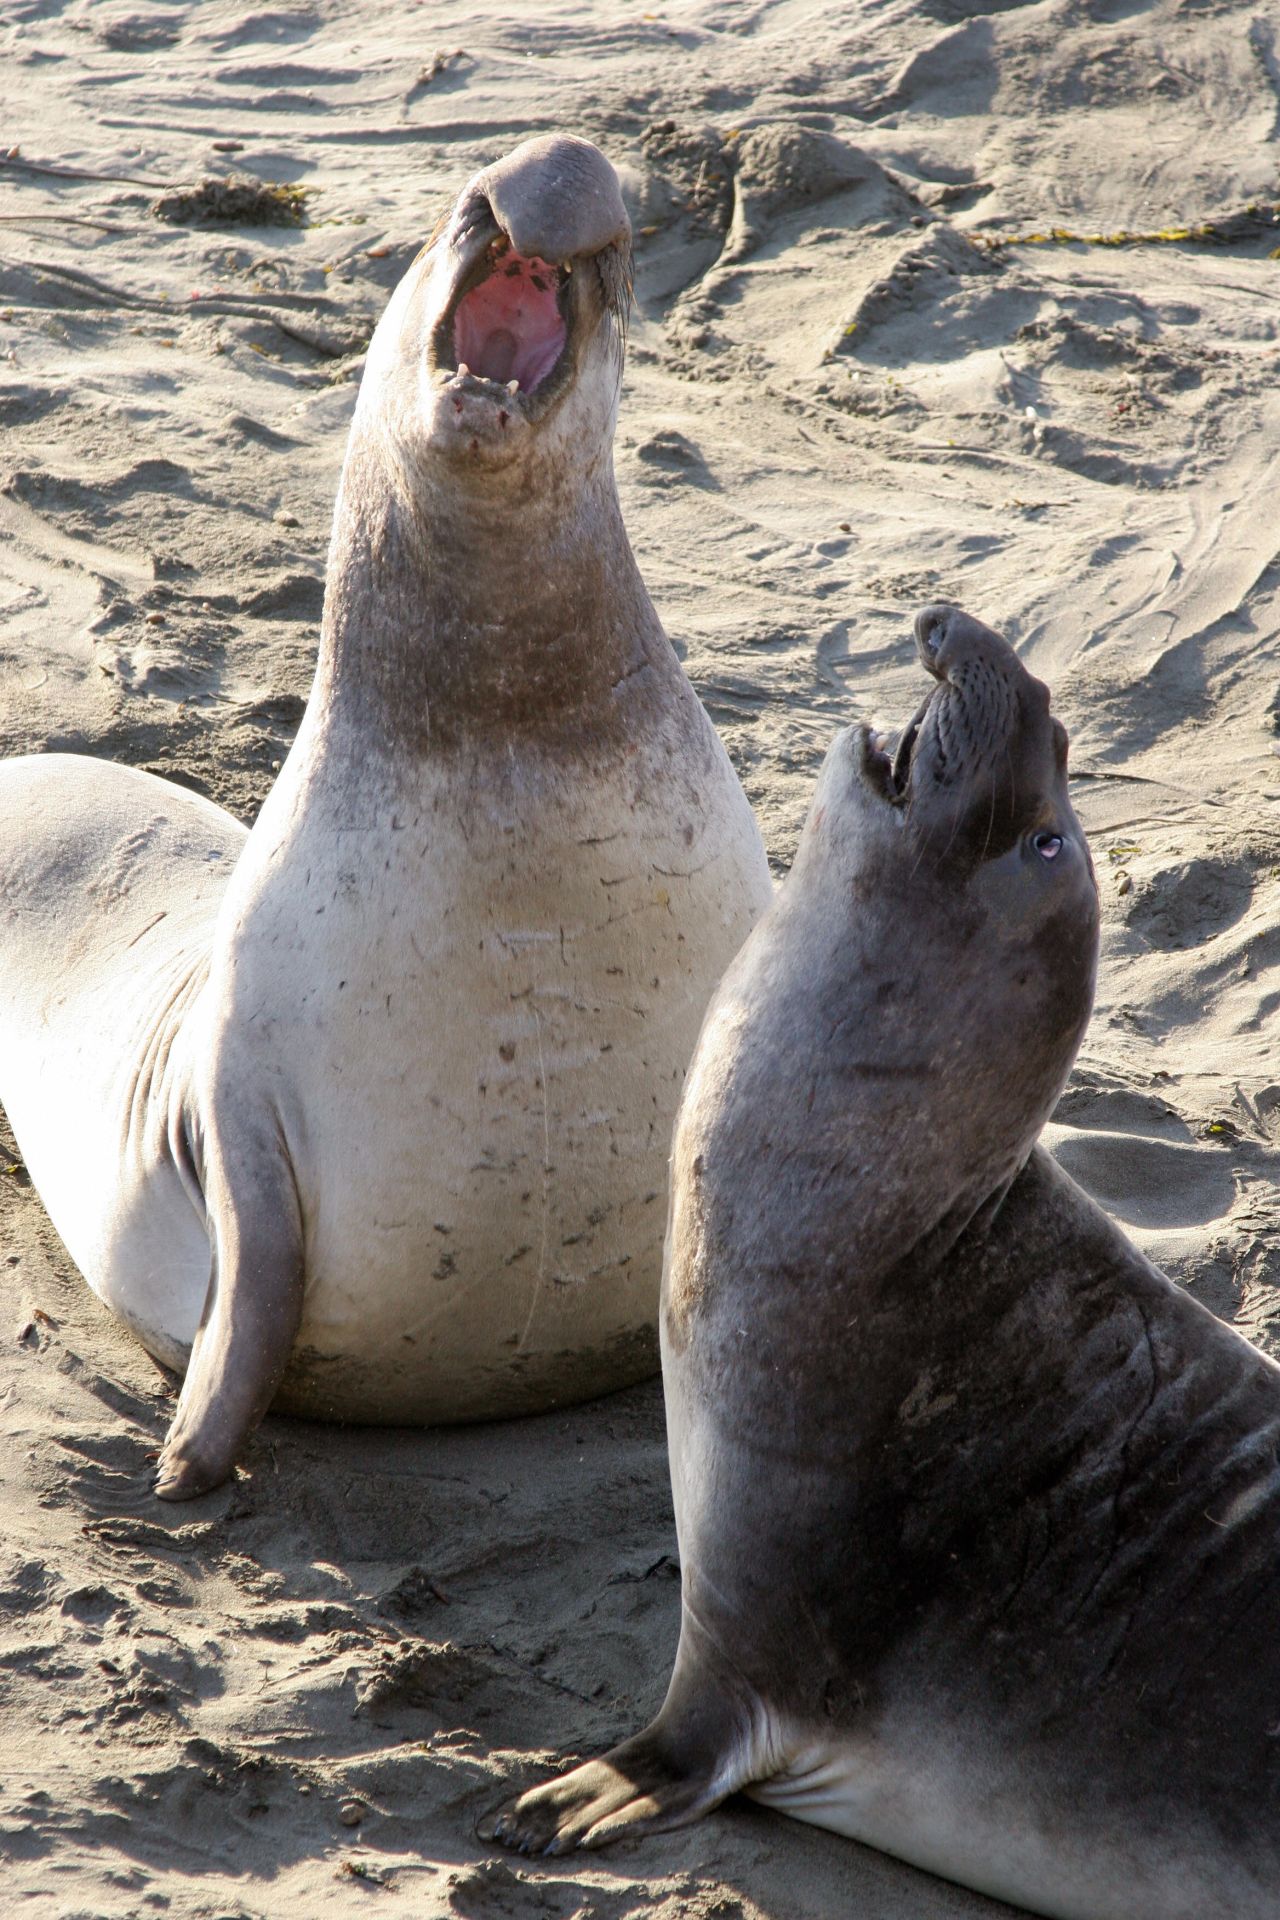 Found lounging hugely on beaches worldwide, the elephant seal looks like someone big, ugly and violent you wouldn't want to encounter in a pub. Curiously enough, those three words also nicely sum up the animal's striking sexual encounter. 